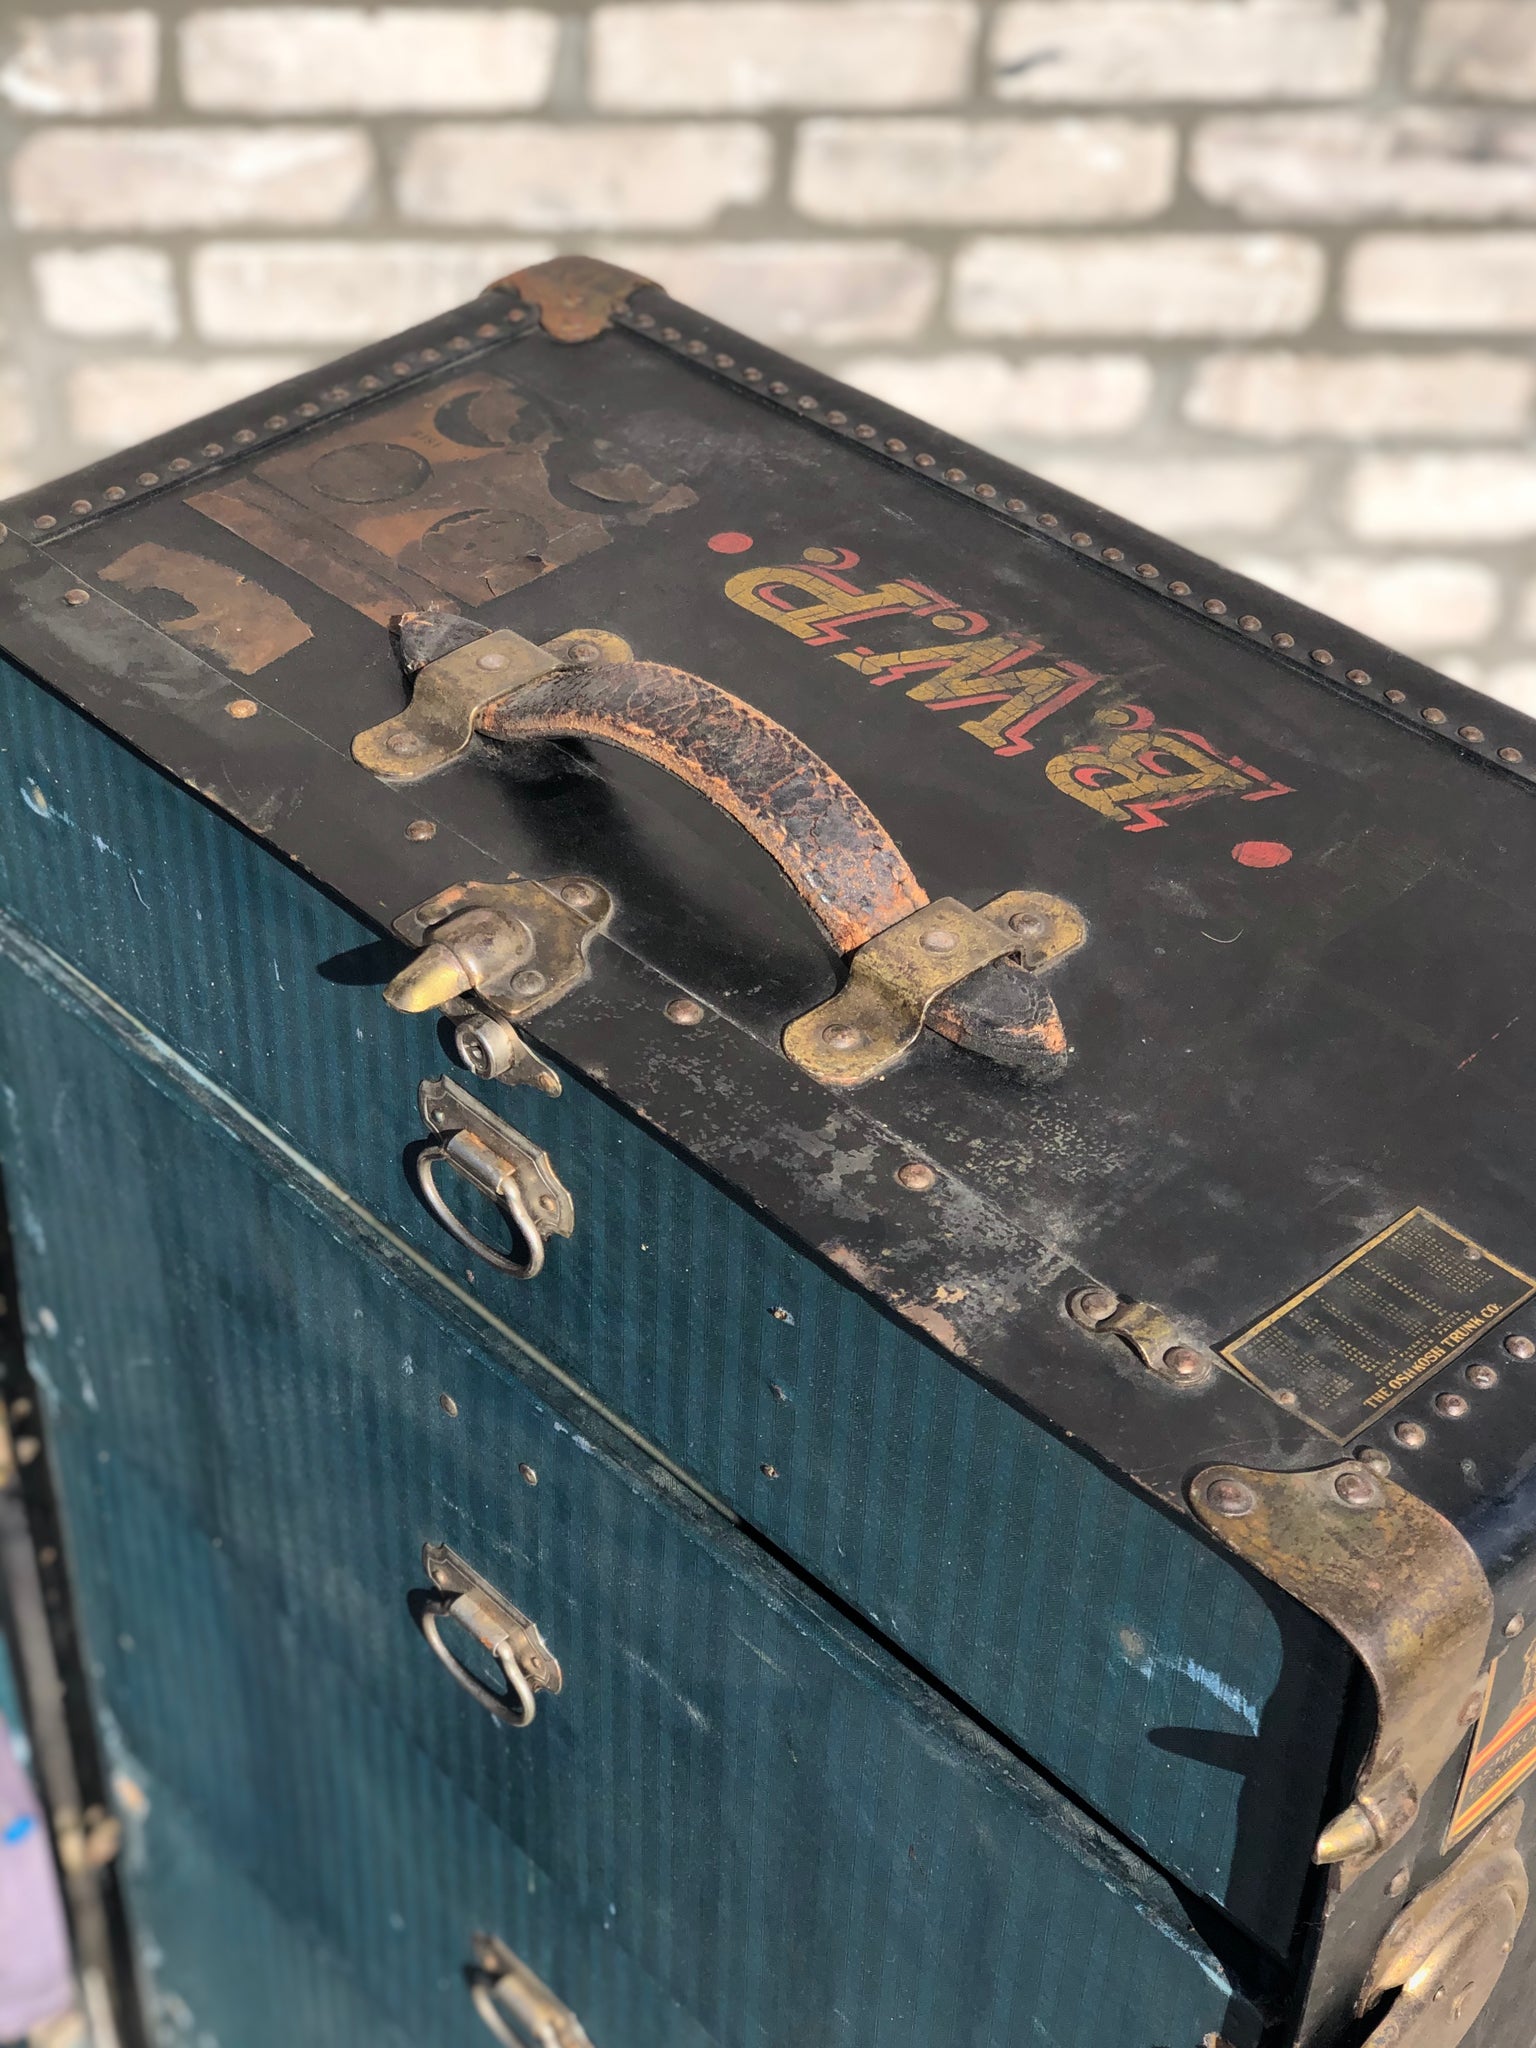 Antique Wheary Steamer Trunk